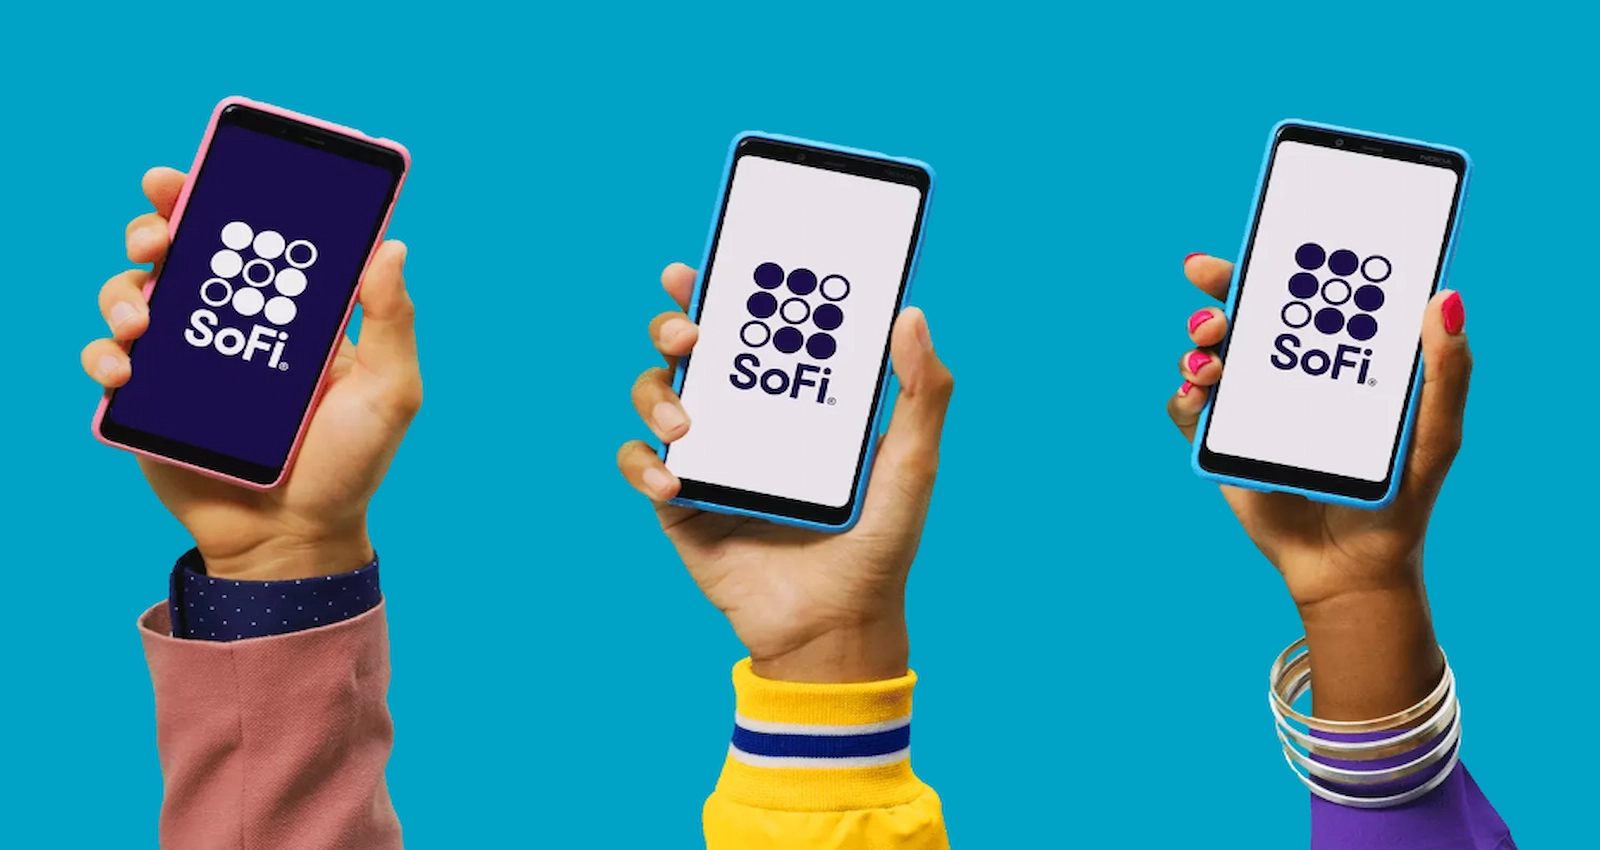 Analysts from 3 firms downgraded SoFi Technologies, causing its shares to bleed